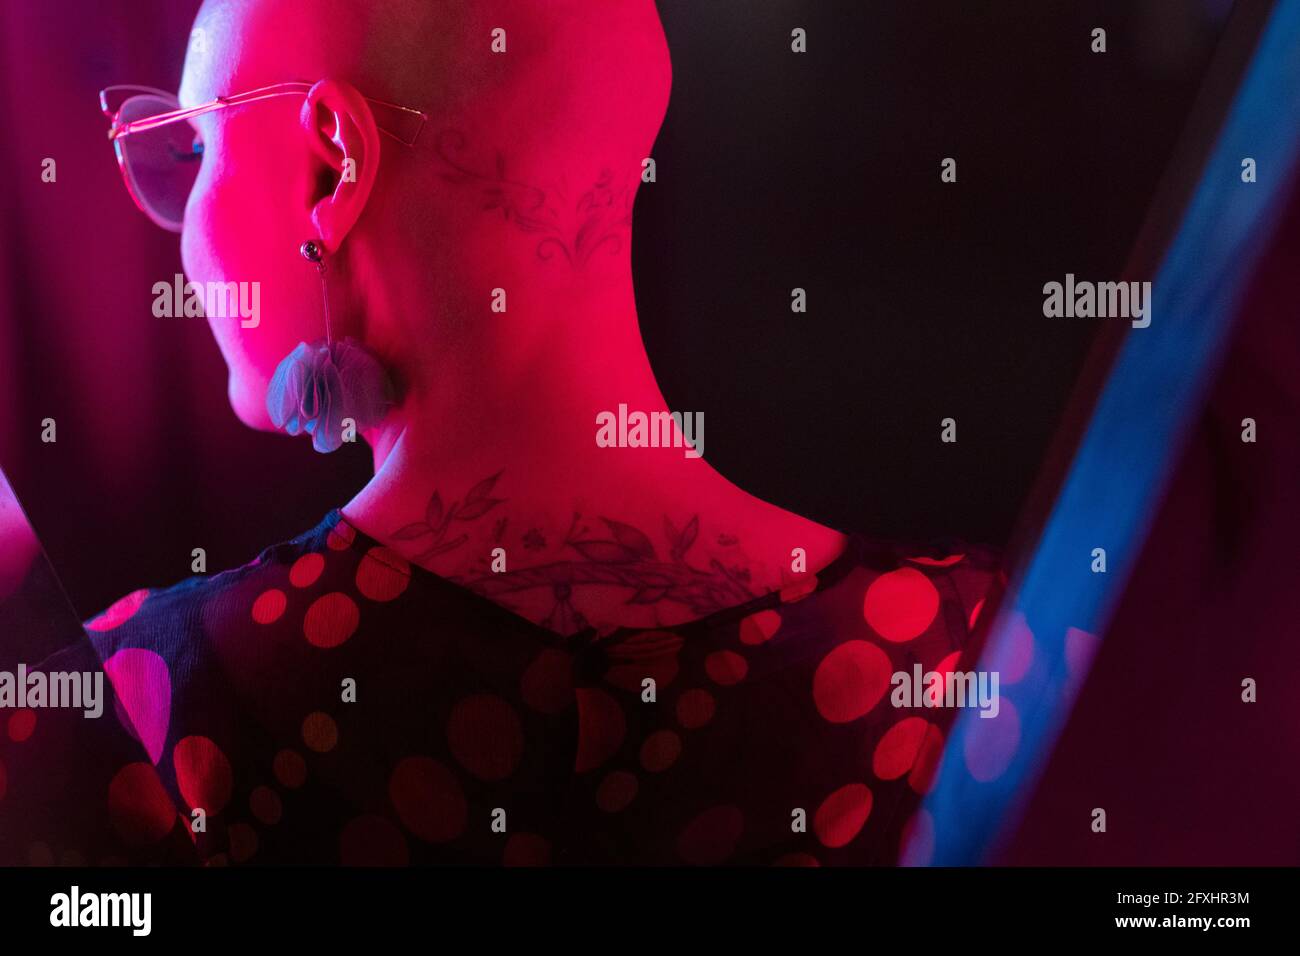 Stylish woman with shaved head and tattoos Stock Photo